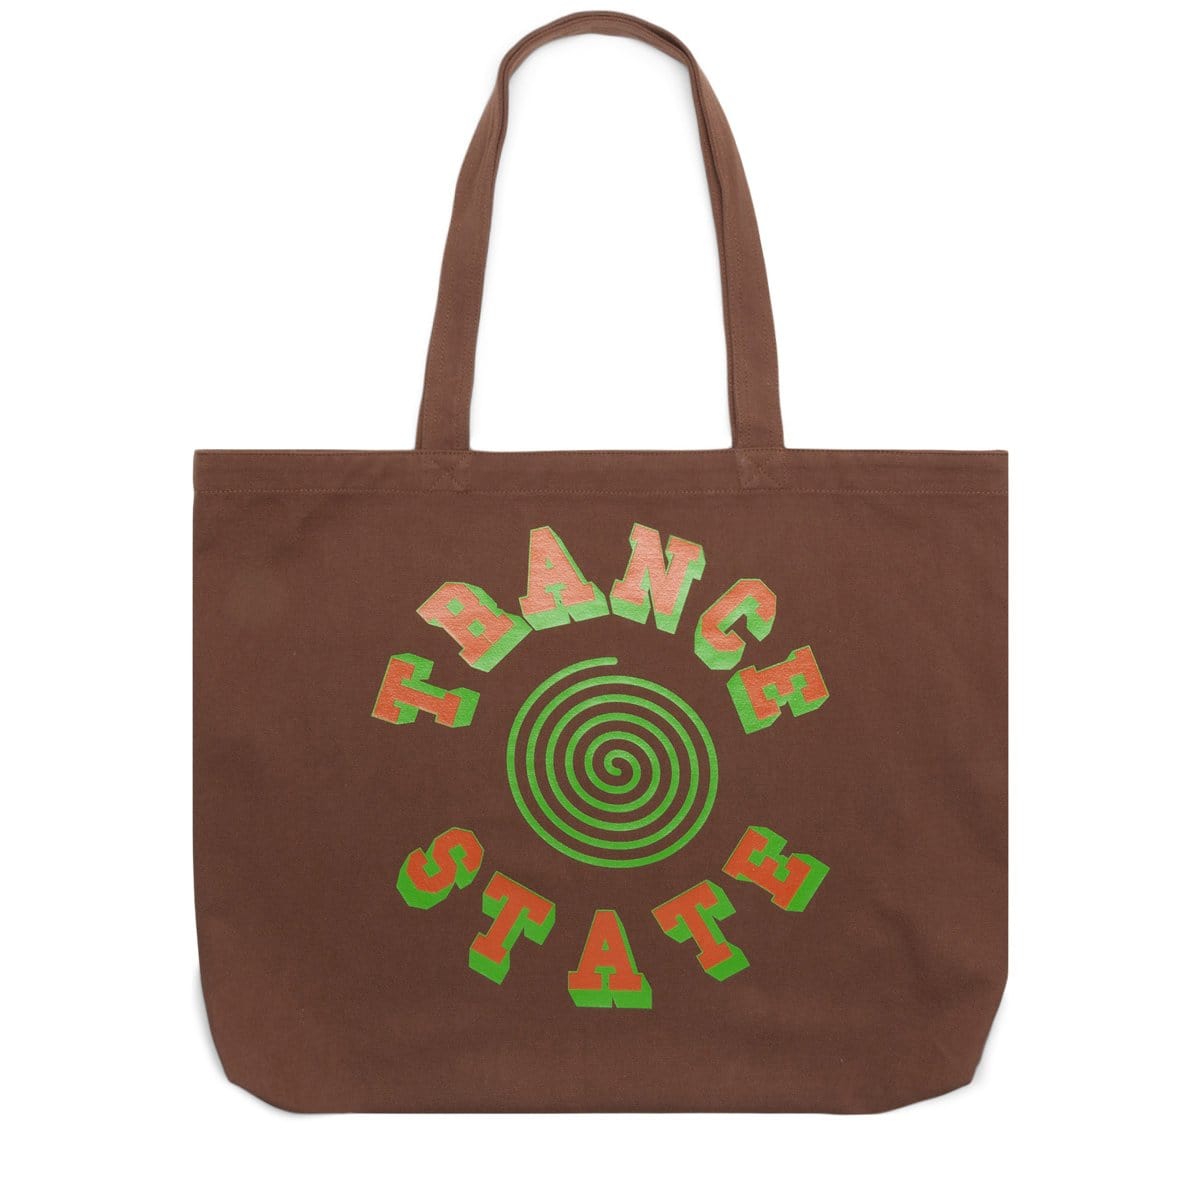 Perks and Mini Bags TOASTED RYE / O/S IS A STATE OF MIND TOTE